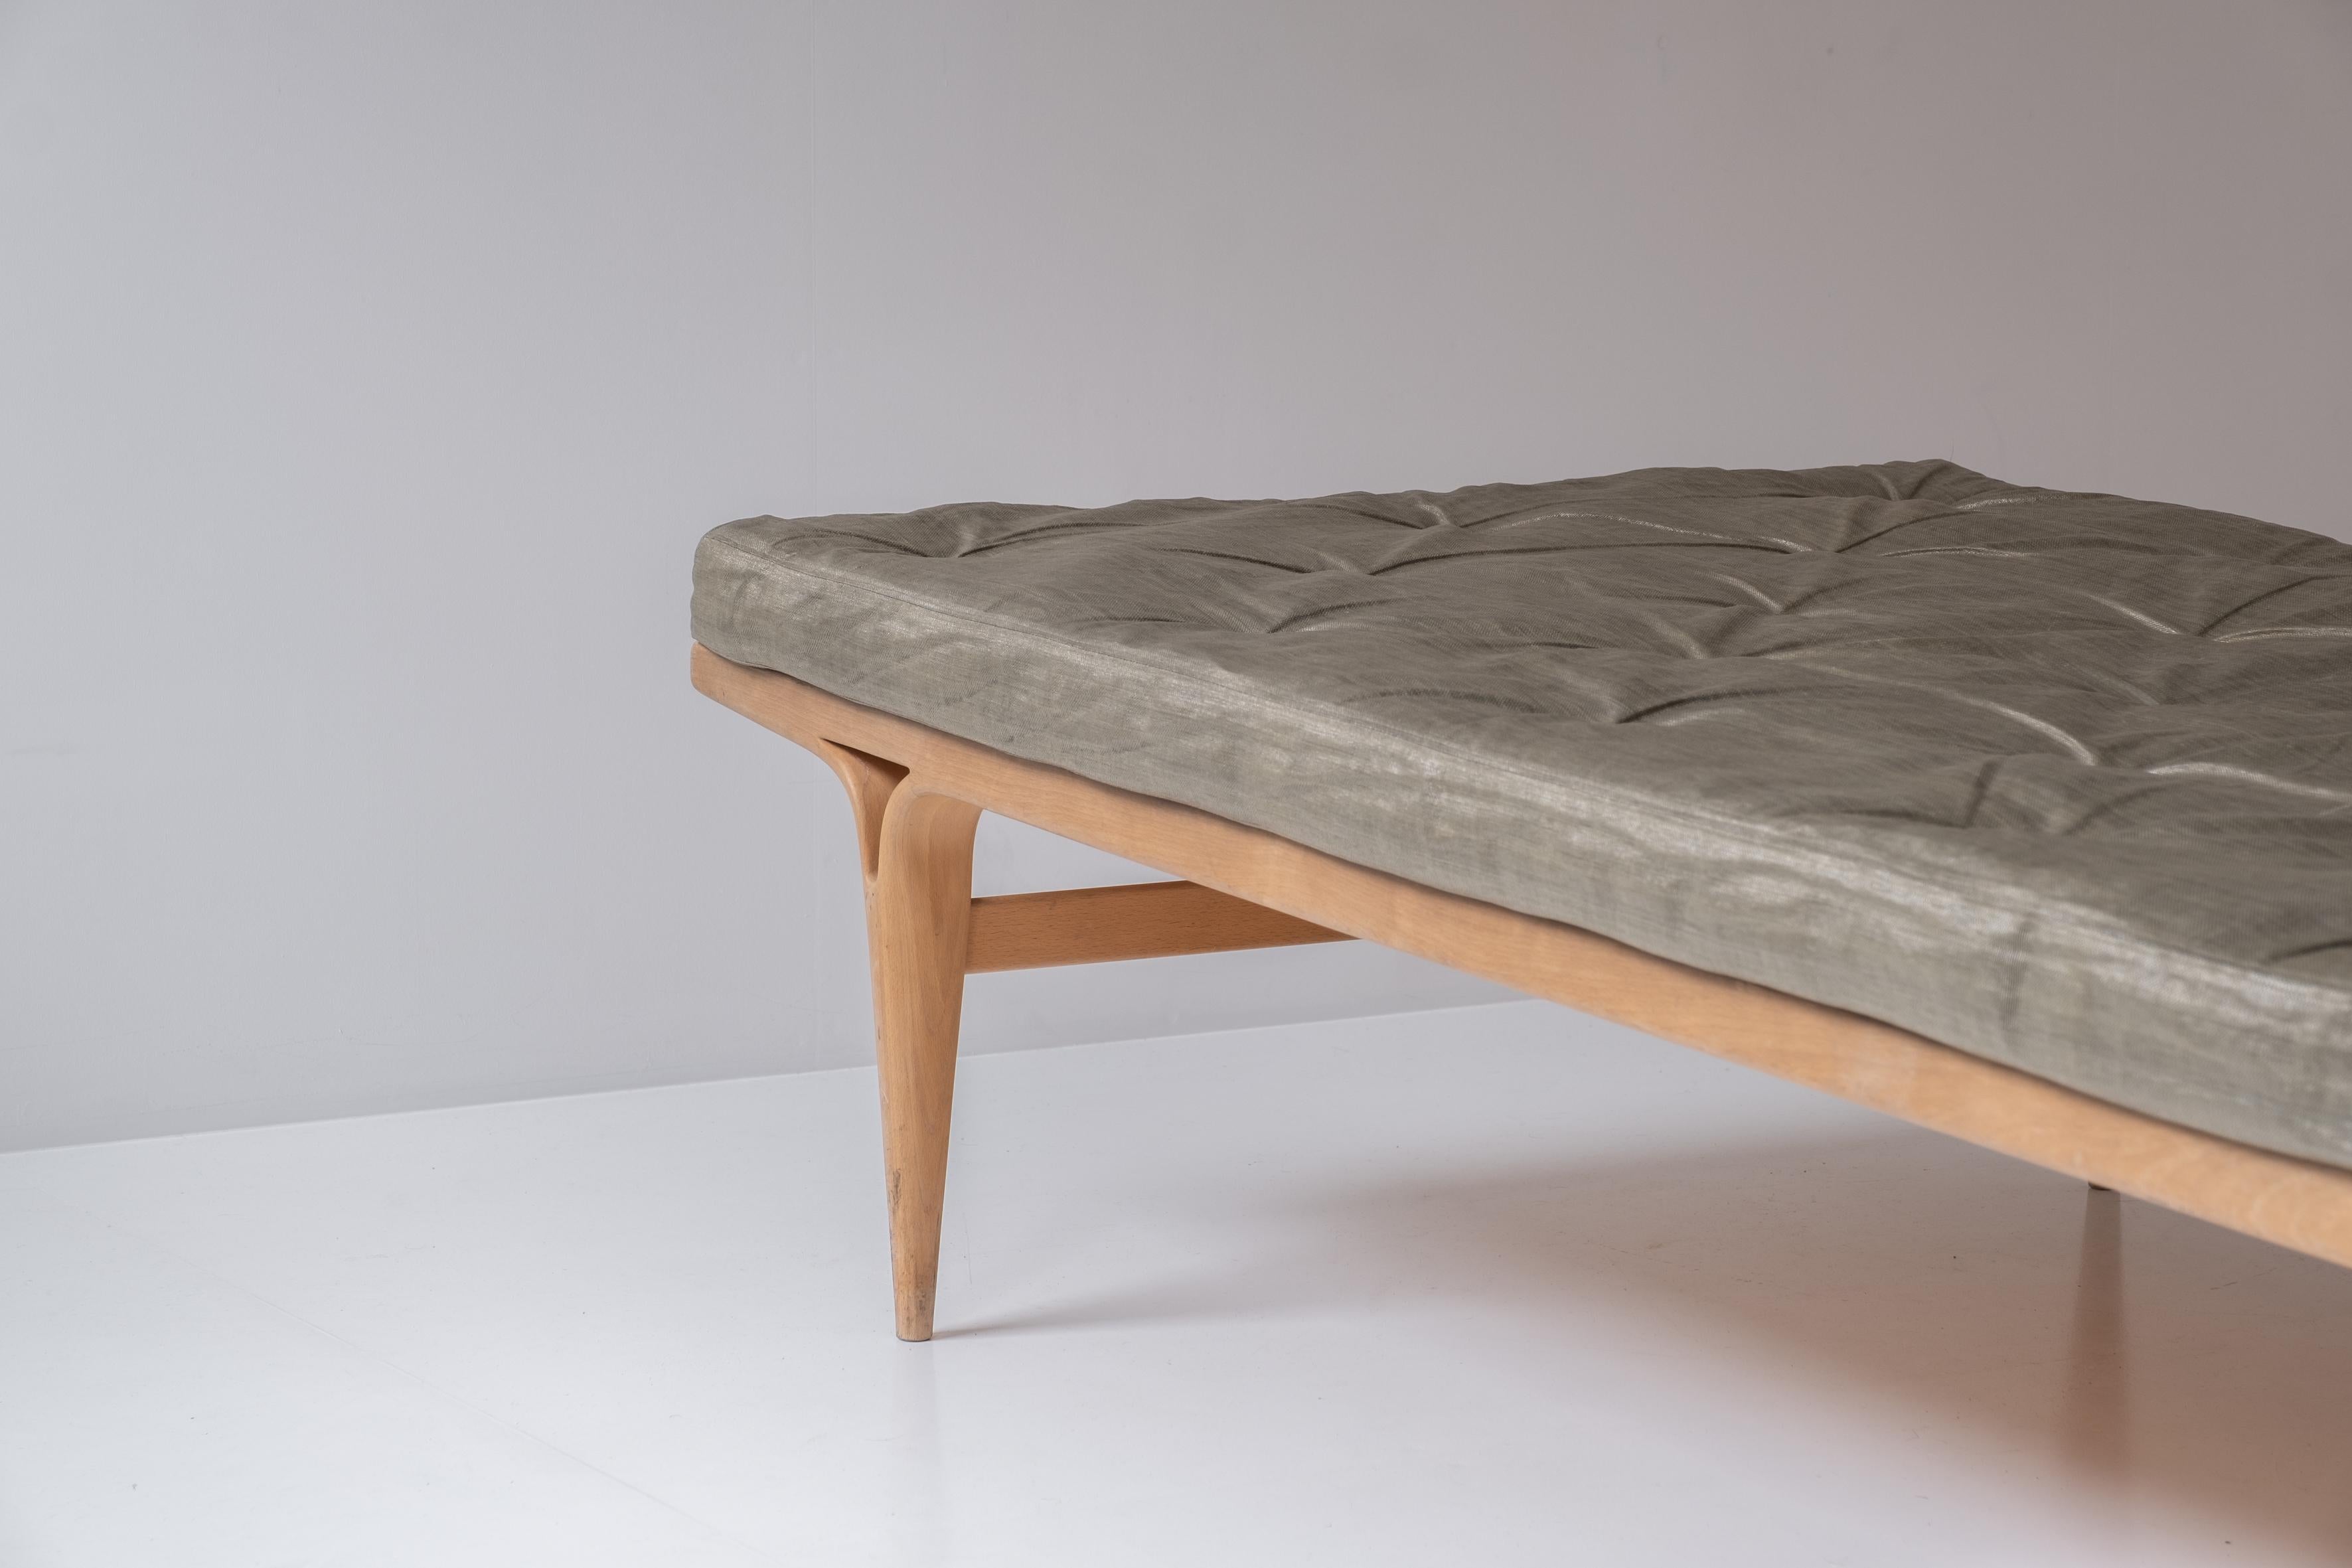 Rare ‘Berlin’ daybed by Bruno Mathsson for Firma Karl Mathsson, Sweden 1969 For Sale 2